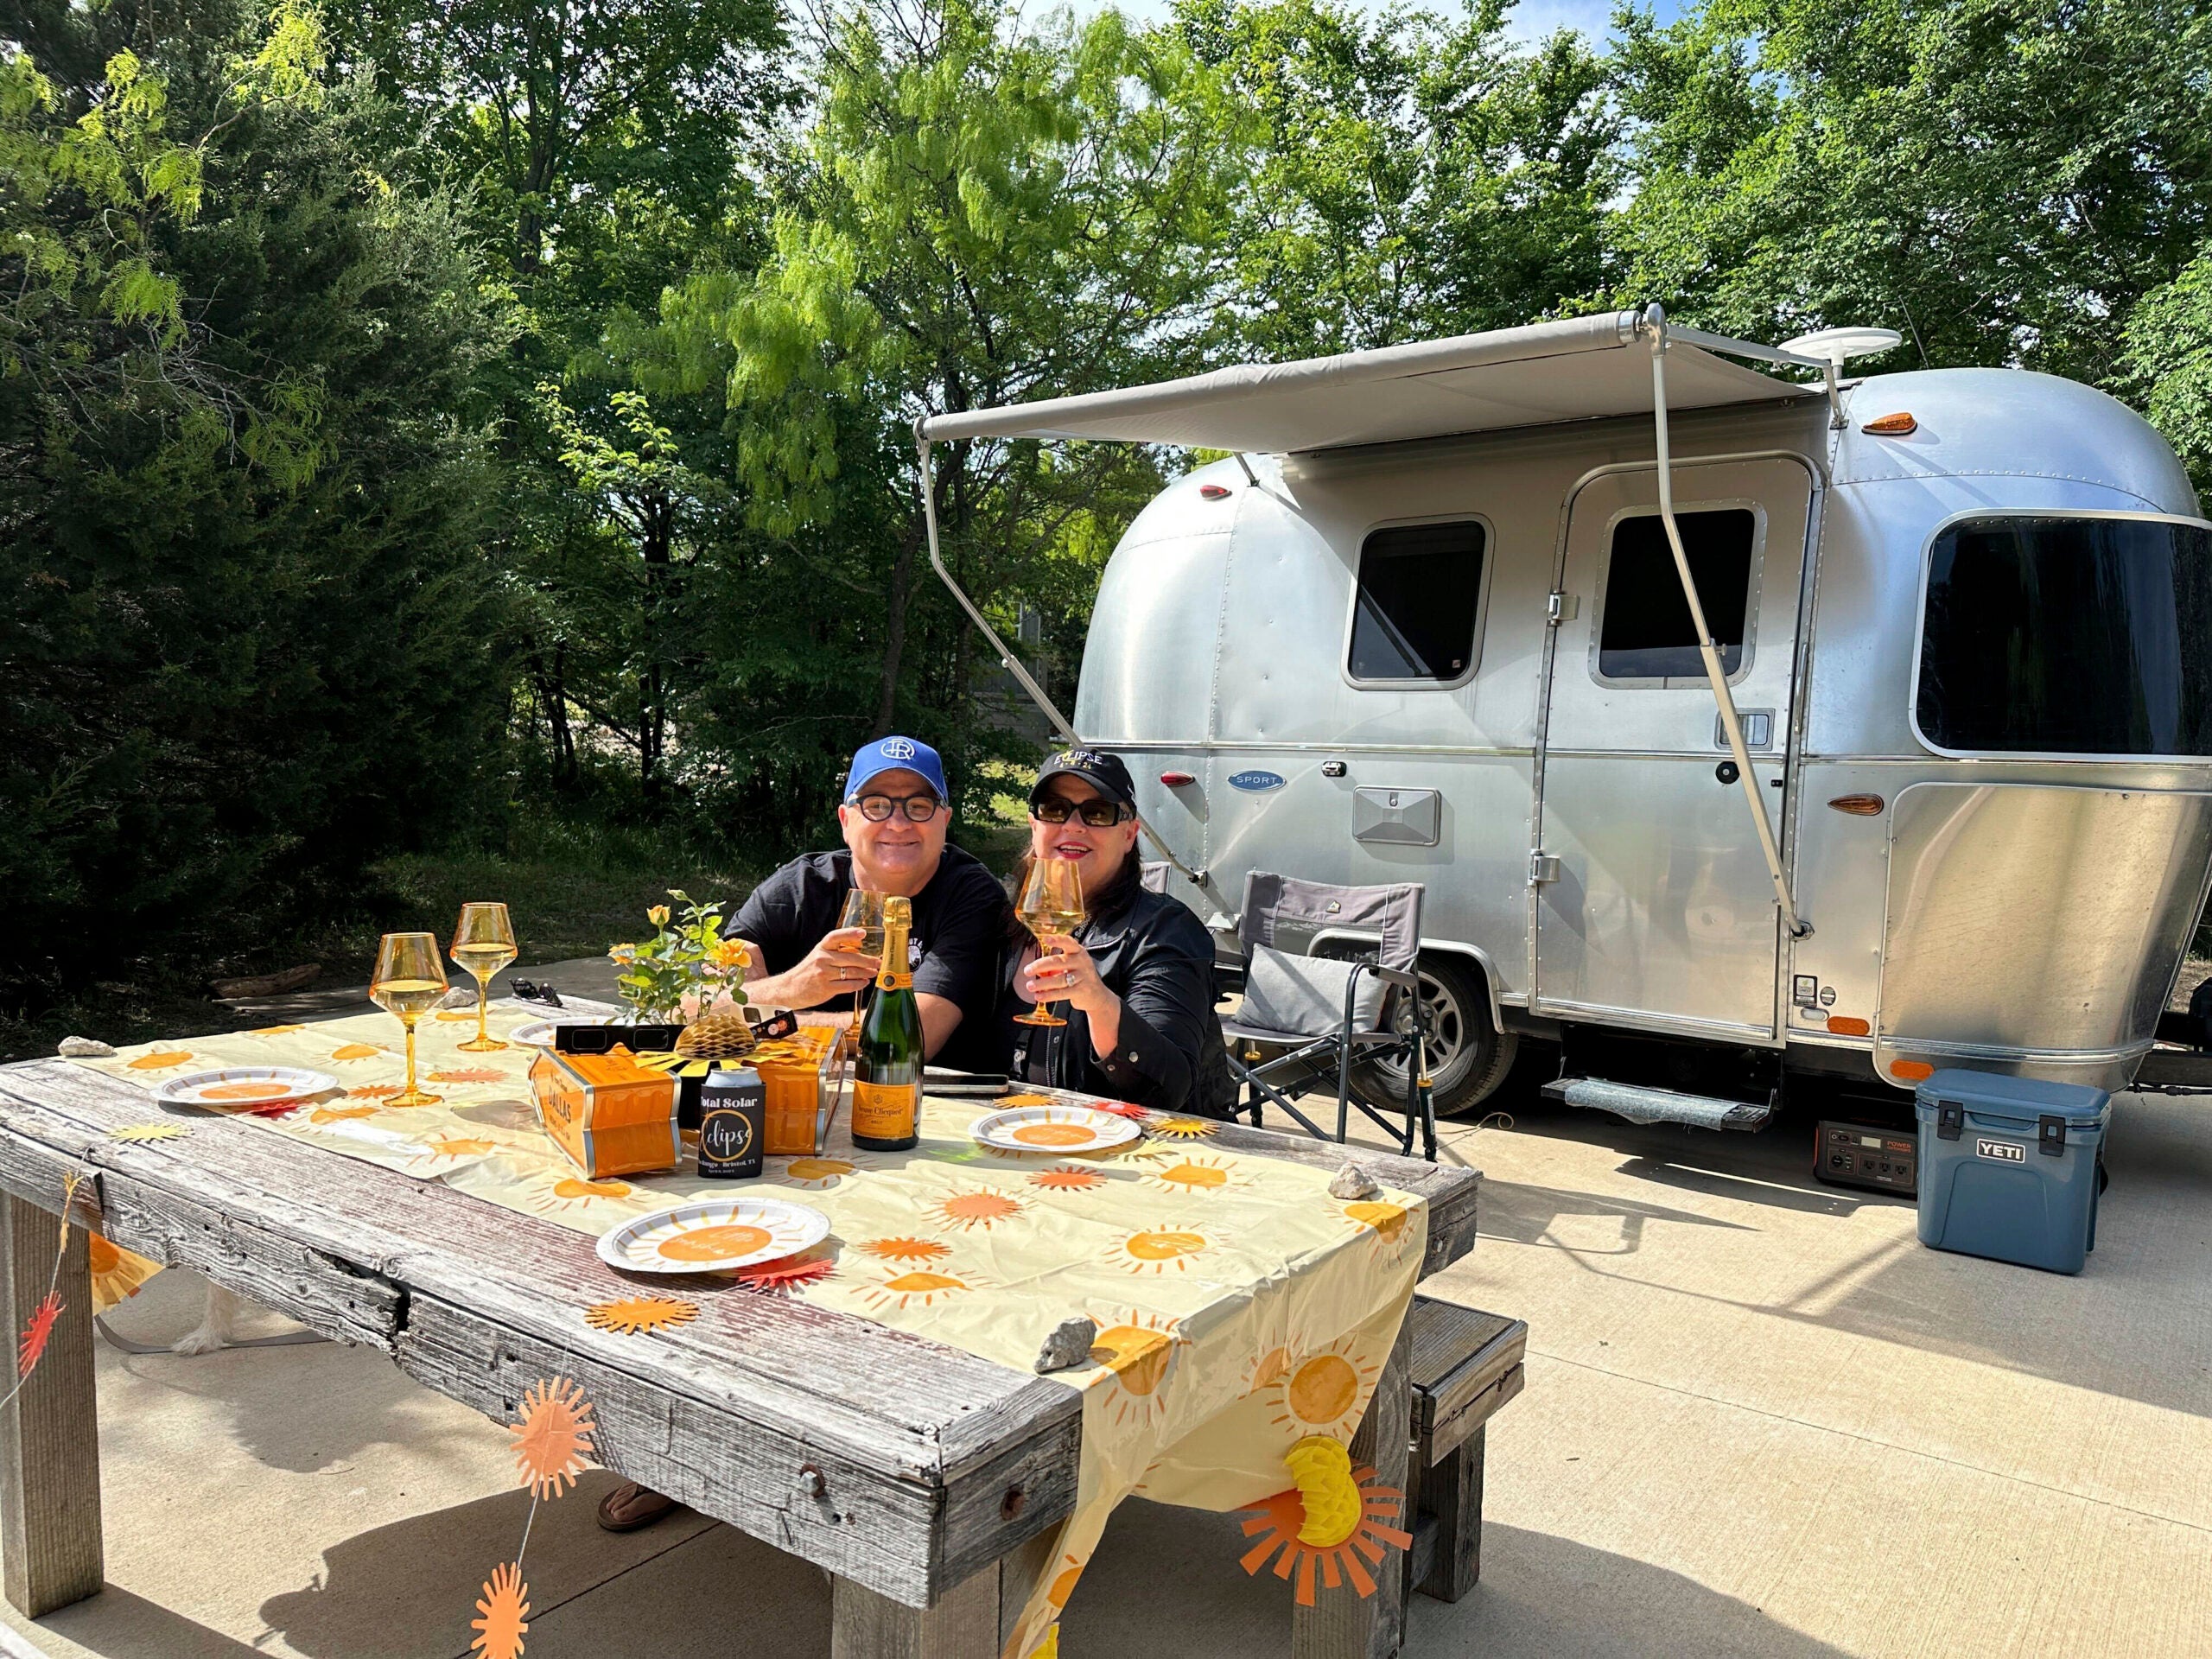 Jeff Pappas and his wife, Maribeth Messineo Pappas, pose by their Airstream trailer at the Range Vintage Trailer Resort near Ennis, Texas.